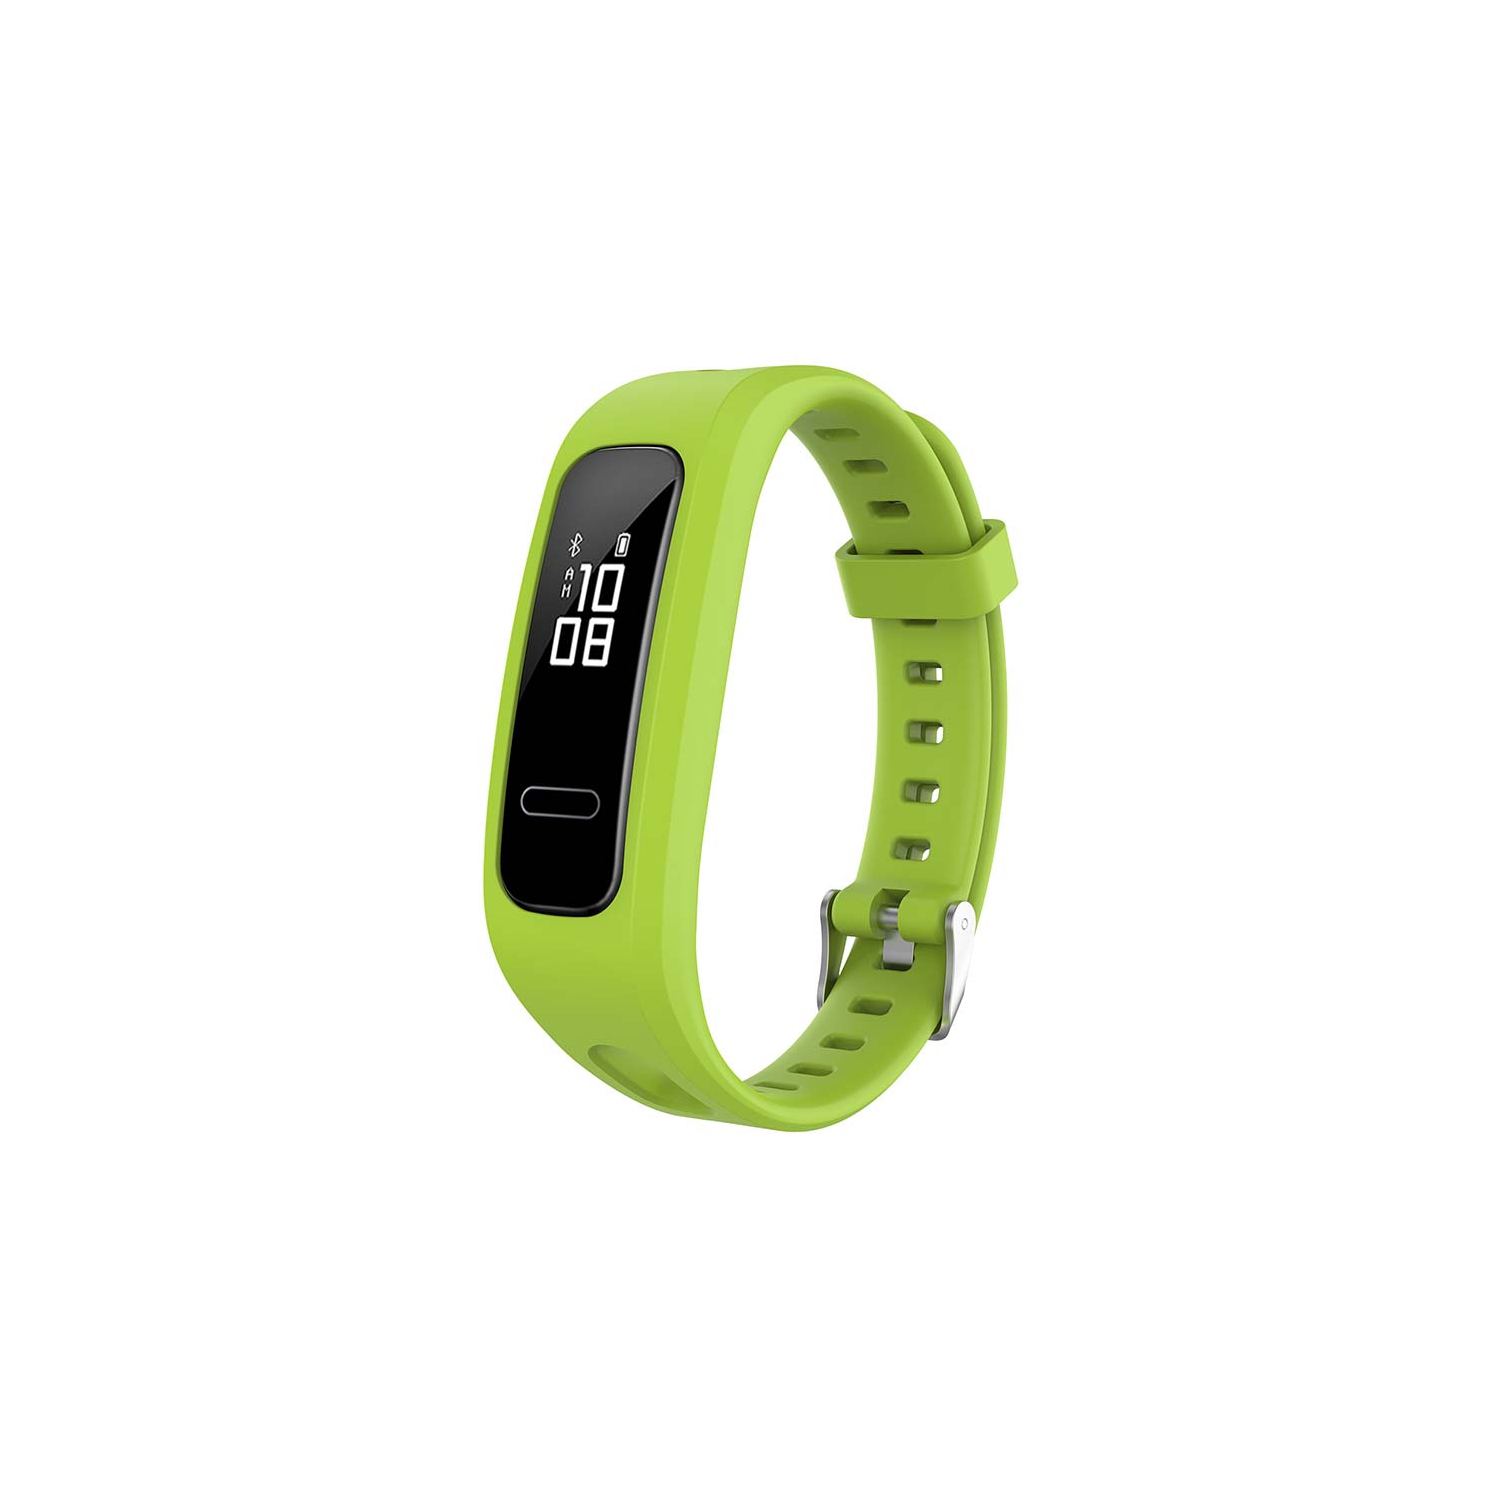 StrapsCo Silicone Rubber Watch Band Strap for Huawei Honor Band 4 Running Edition / 4e / 3e - Lime Green